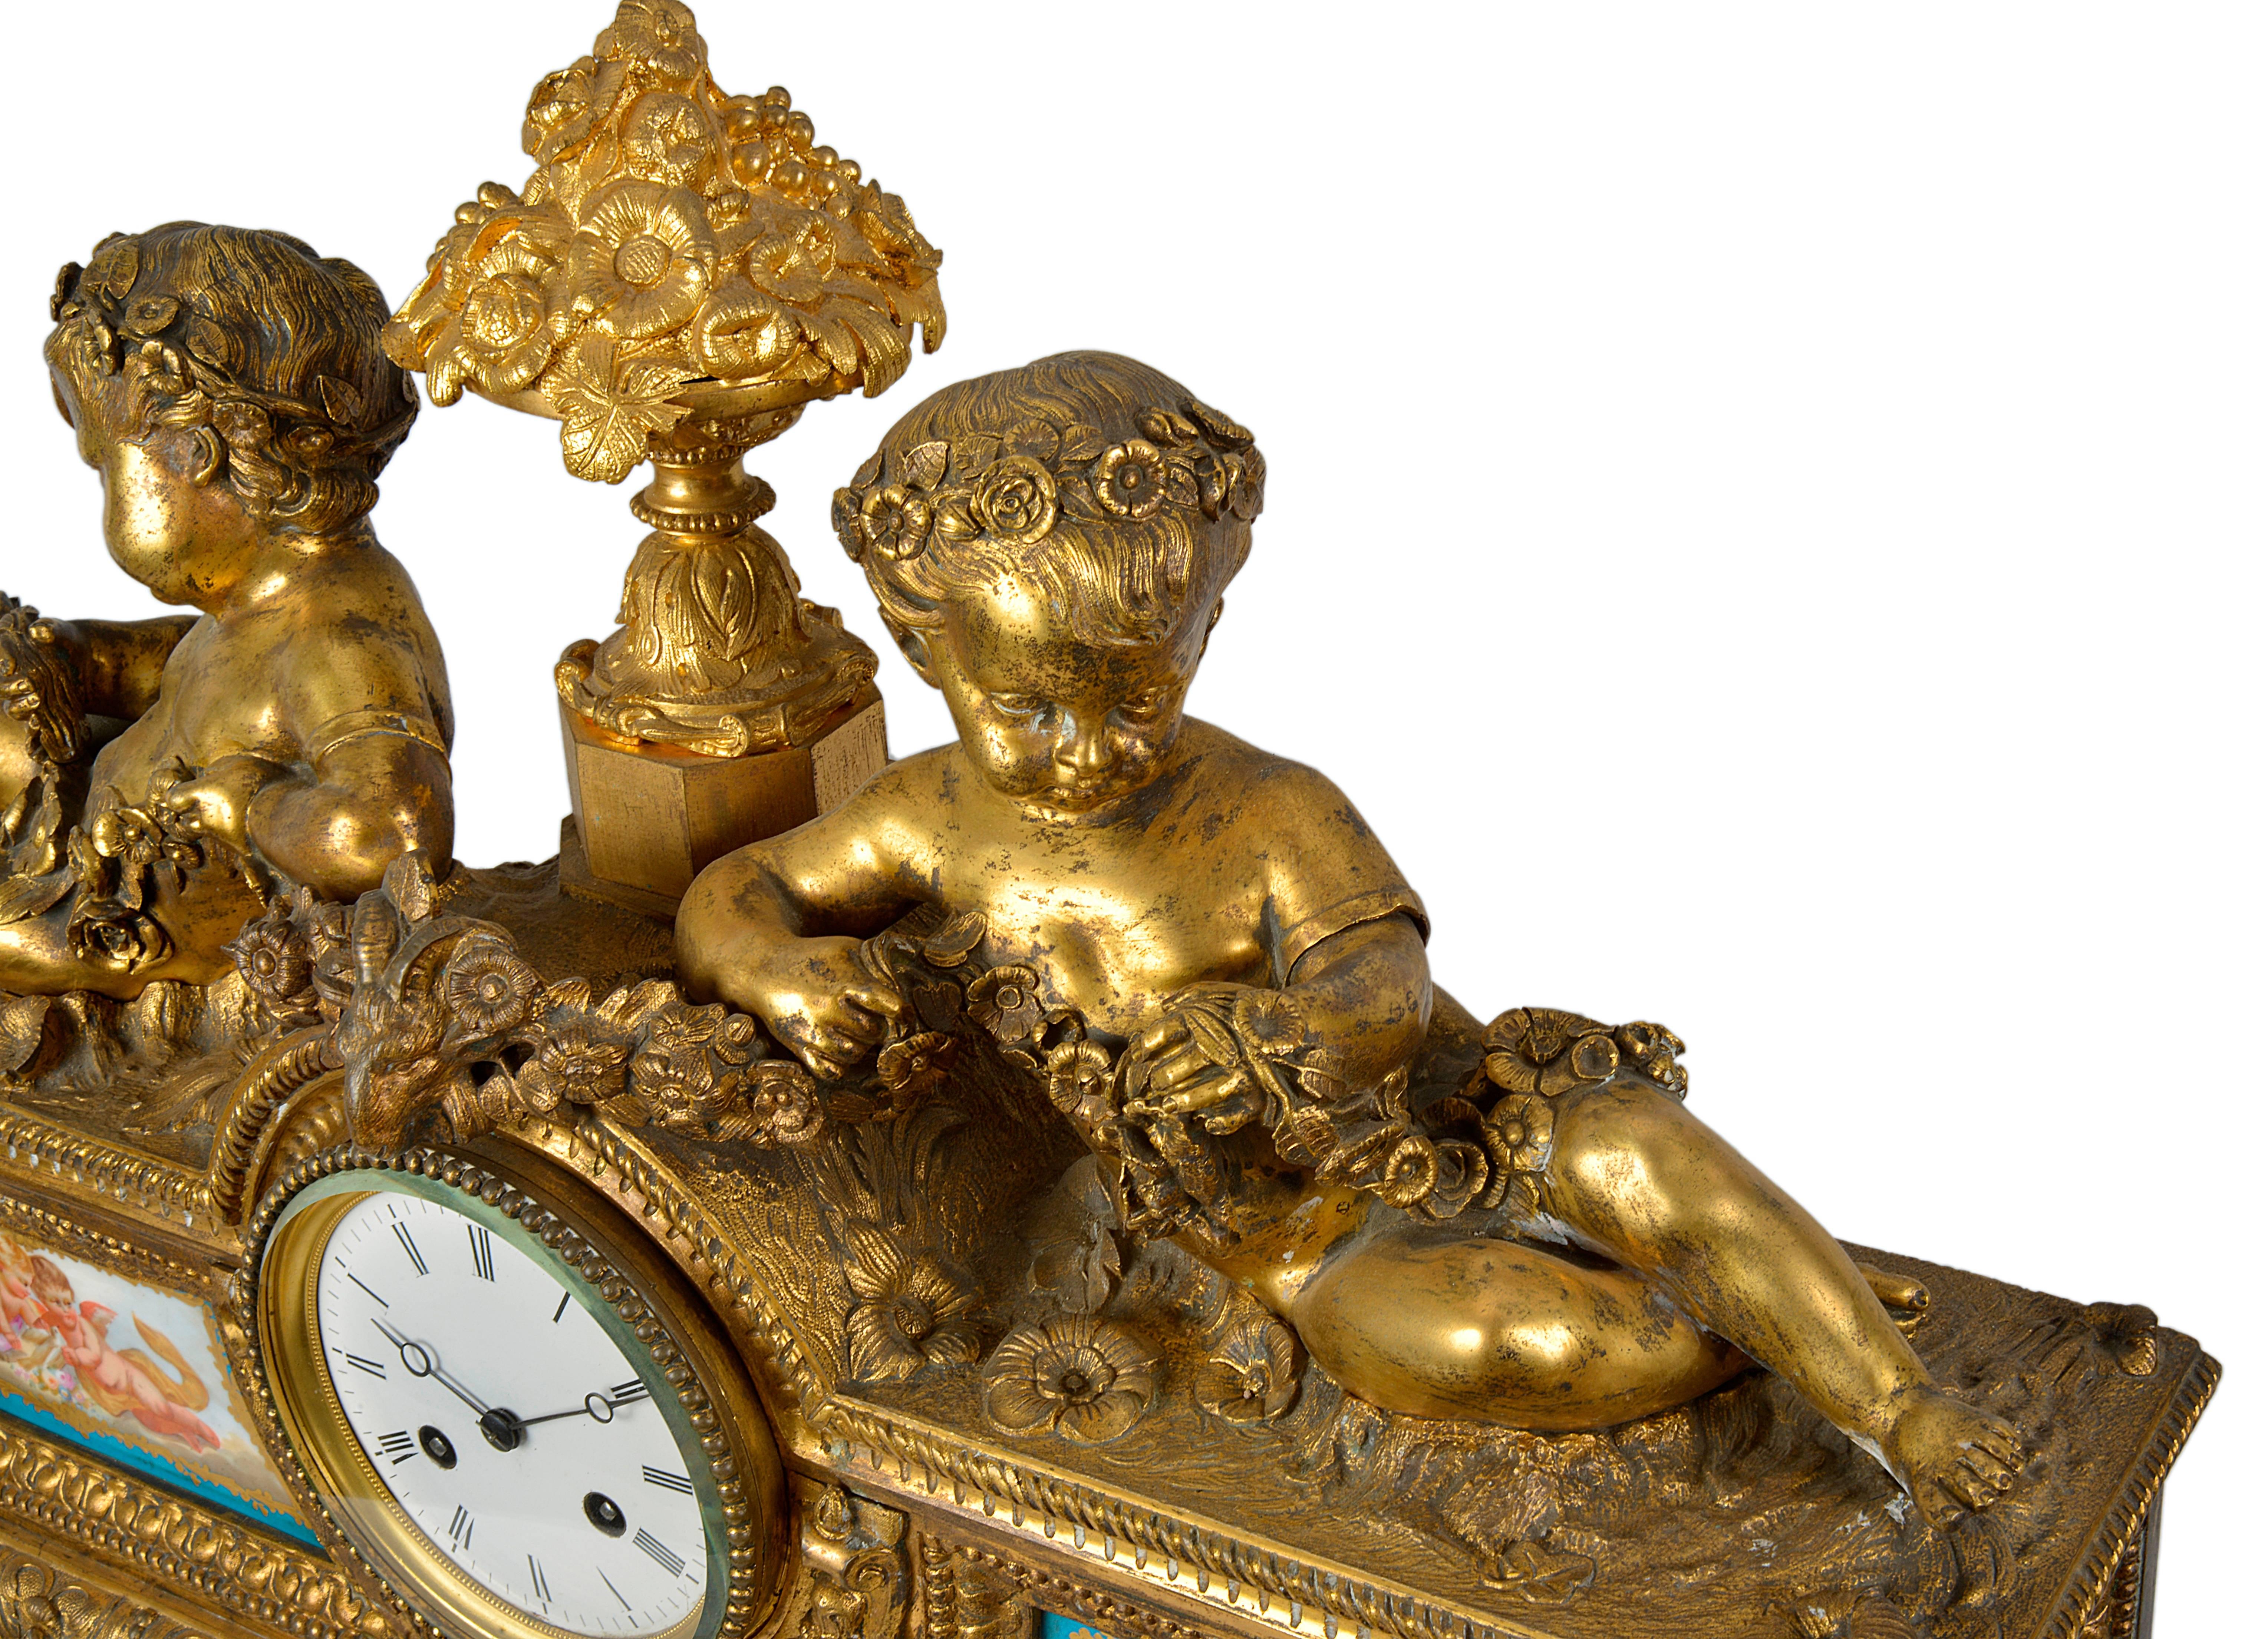 A very impressive 19th century French gilded ormolu and Severs porcelain mantel clock. Having putti on either side, holding garlands of flowers. Inset hand-painted Sevres porcelain panels with classical cherubs. The clock having an enamel dial, an